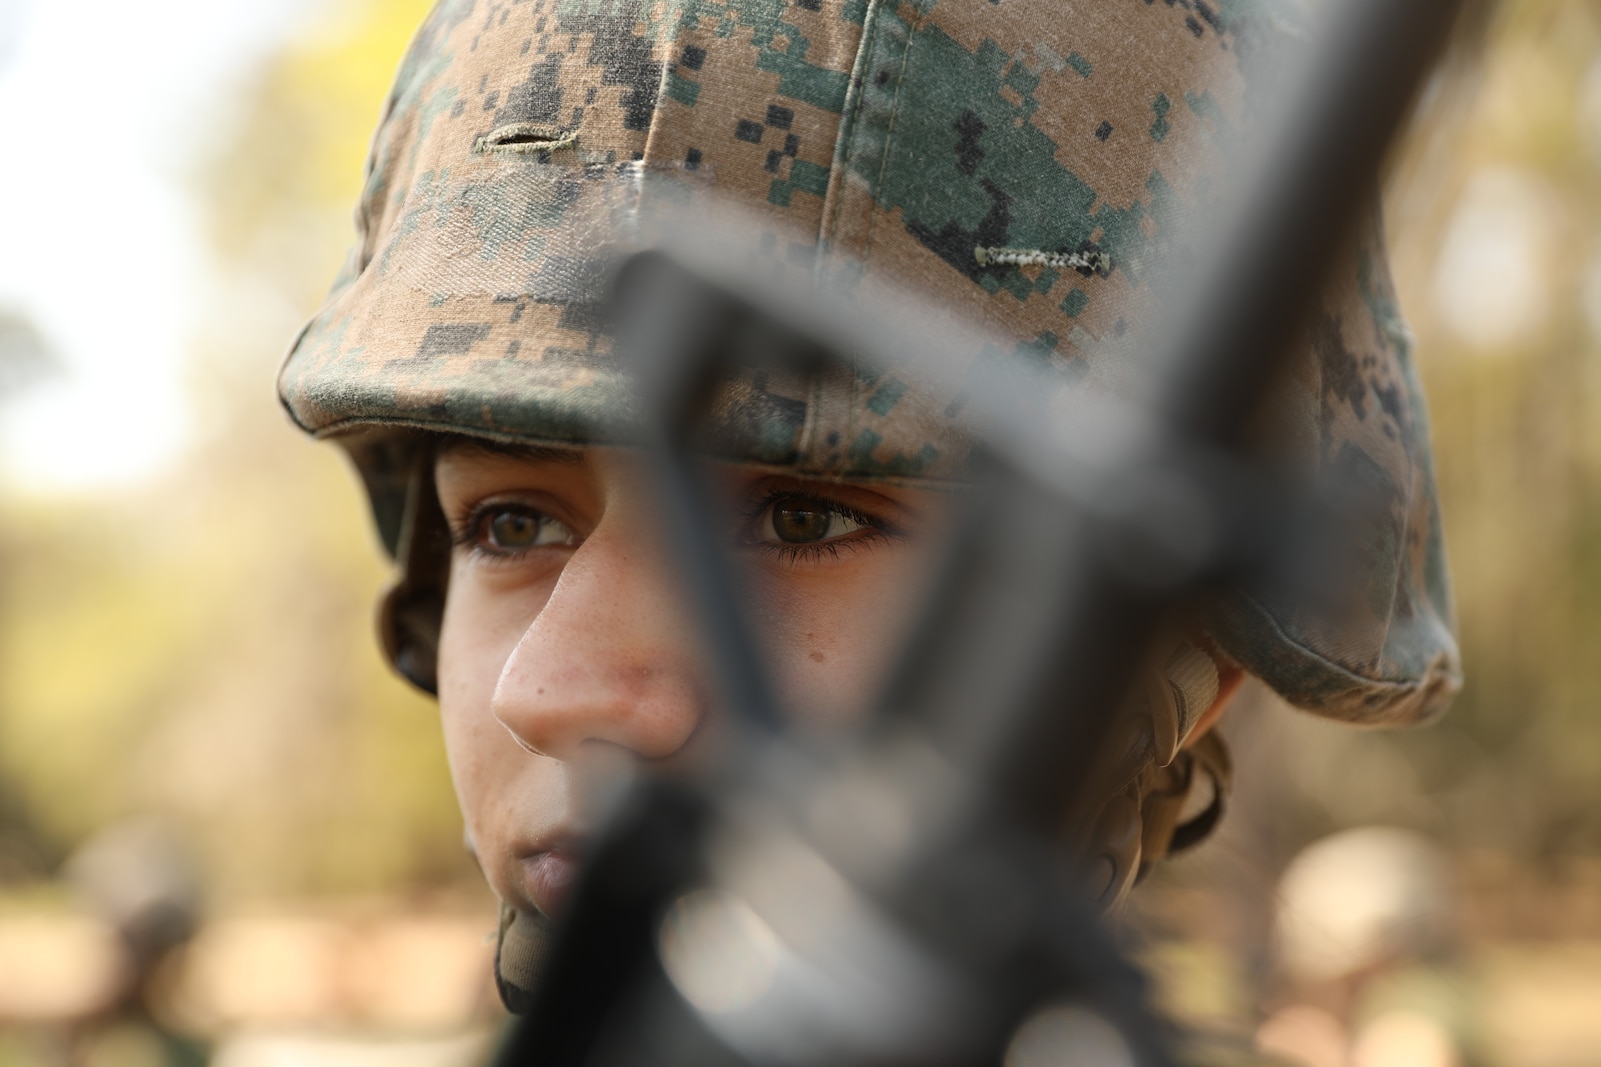 A recruit with Delta Company, 1st Recruit Training Battalion, prepares to perform his next series of techniques aboard Marine Corps Recruit Training Depot Parris Island, S.C., Mar. 14, 2020. The purpose of the Marine Corps Martial Arts Program is to execute unarmed and armed techniques to  use lethal and non-lethal force across a spectrum of violence.  (U.S. Marine Corps photos by Lance Cpl. Ryan Hageali)